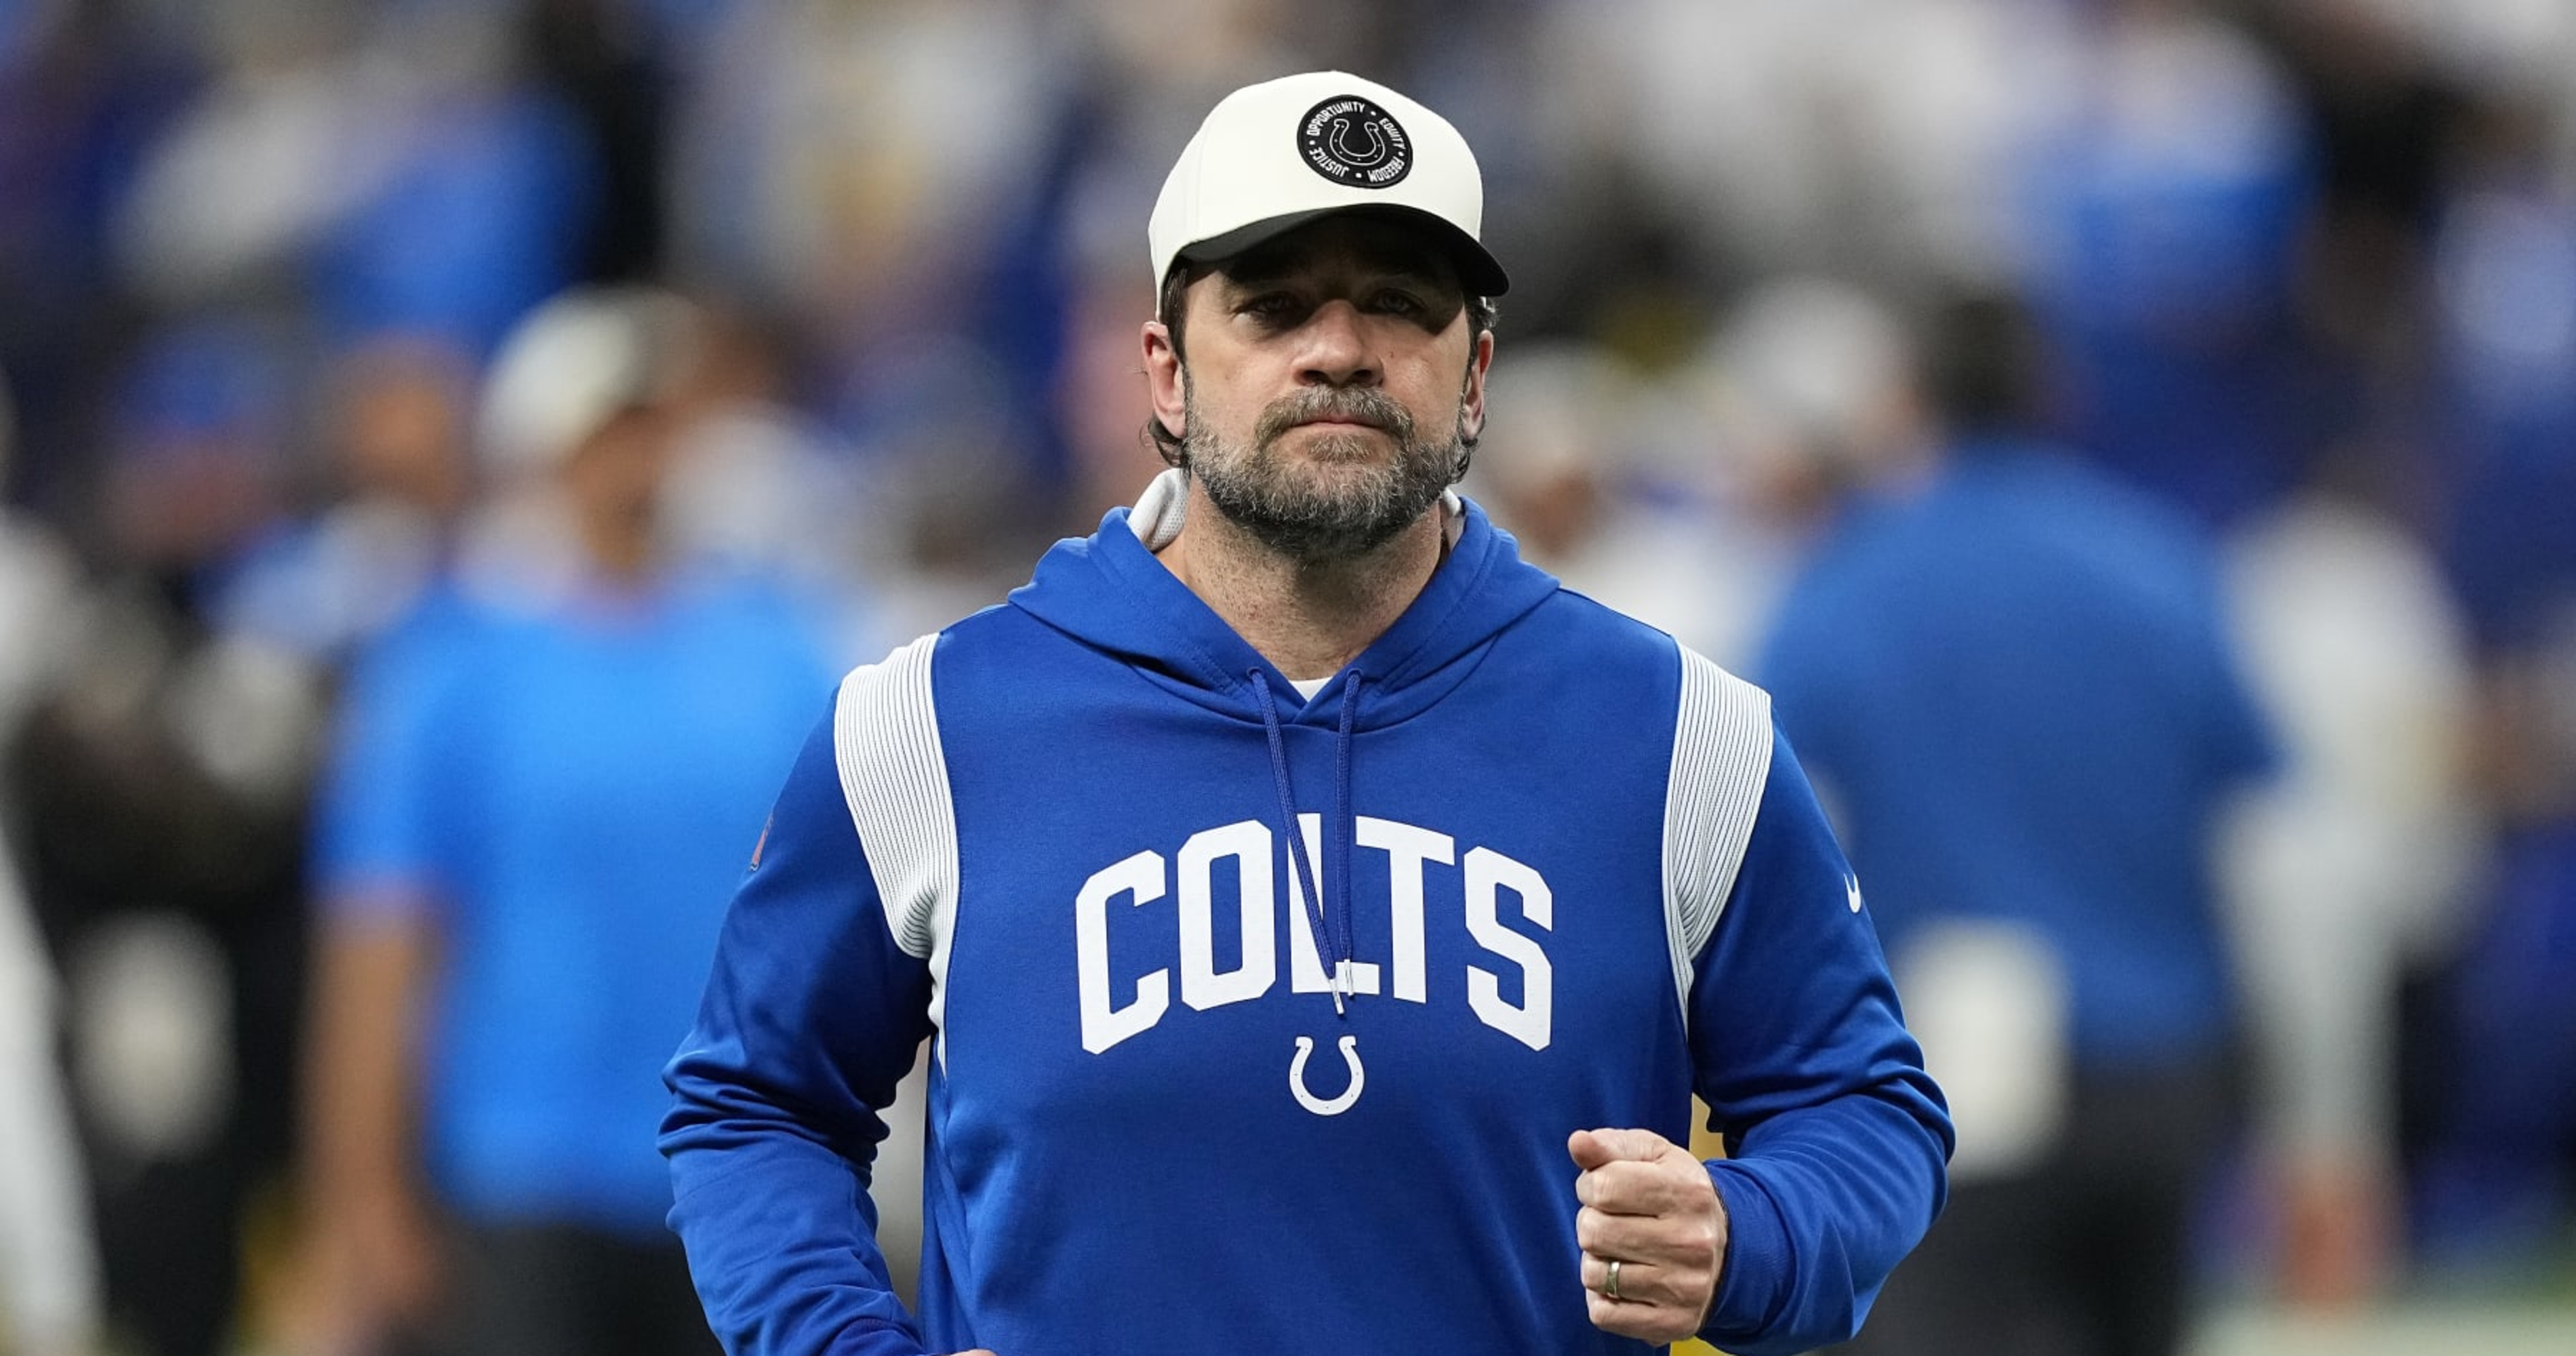 Colts Players, Coaches Found out About Jeff Saturday Hire Through